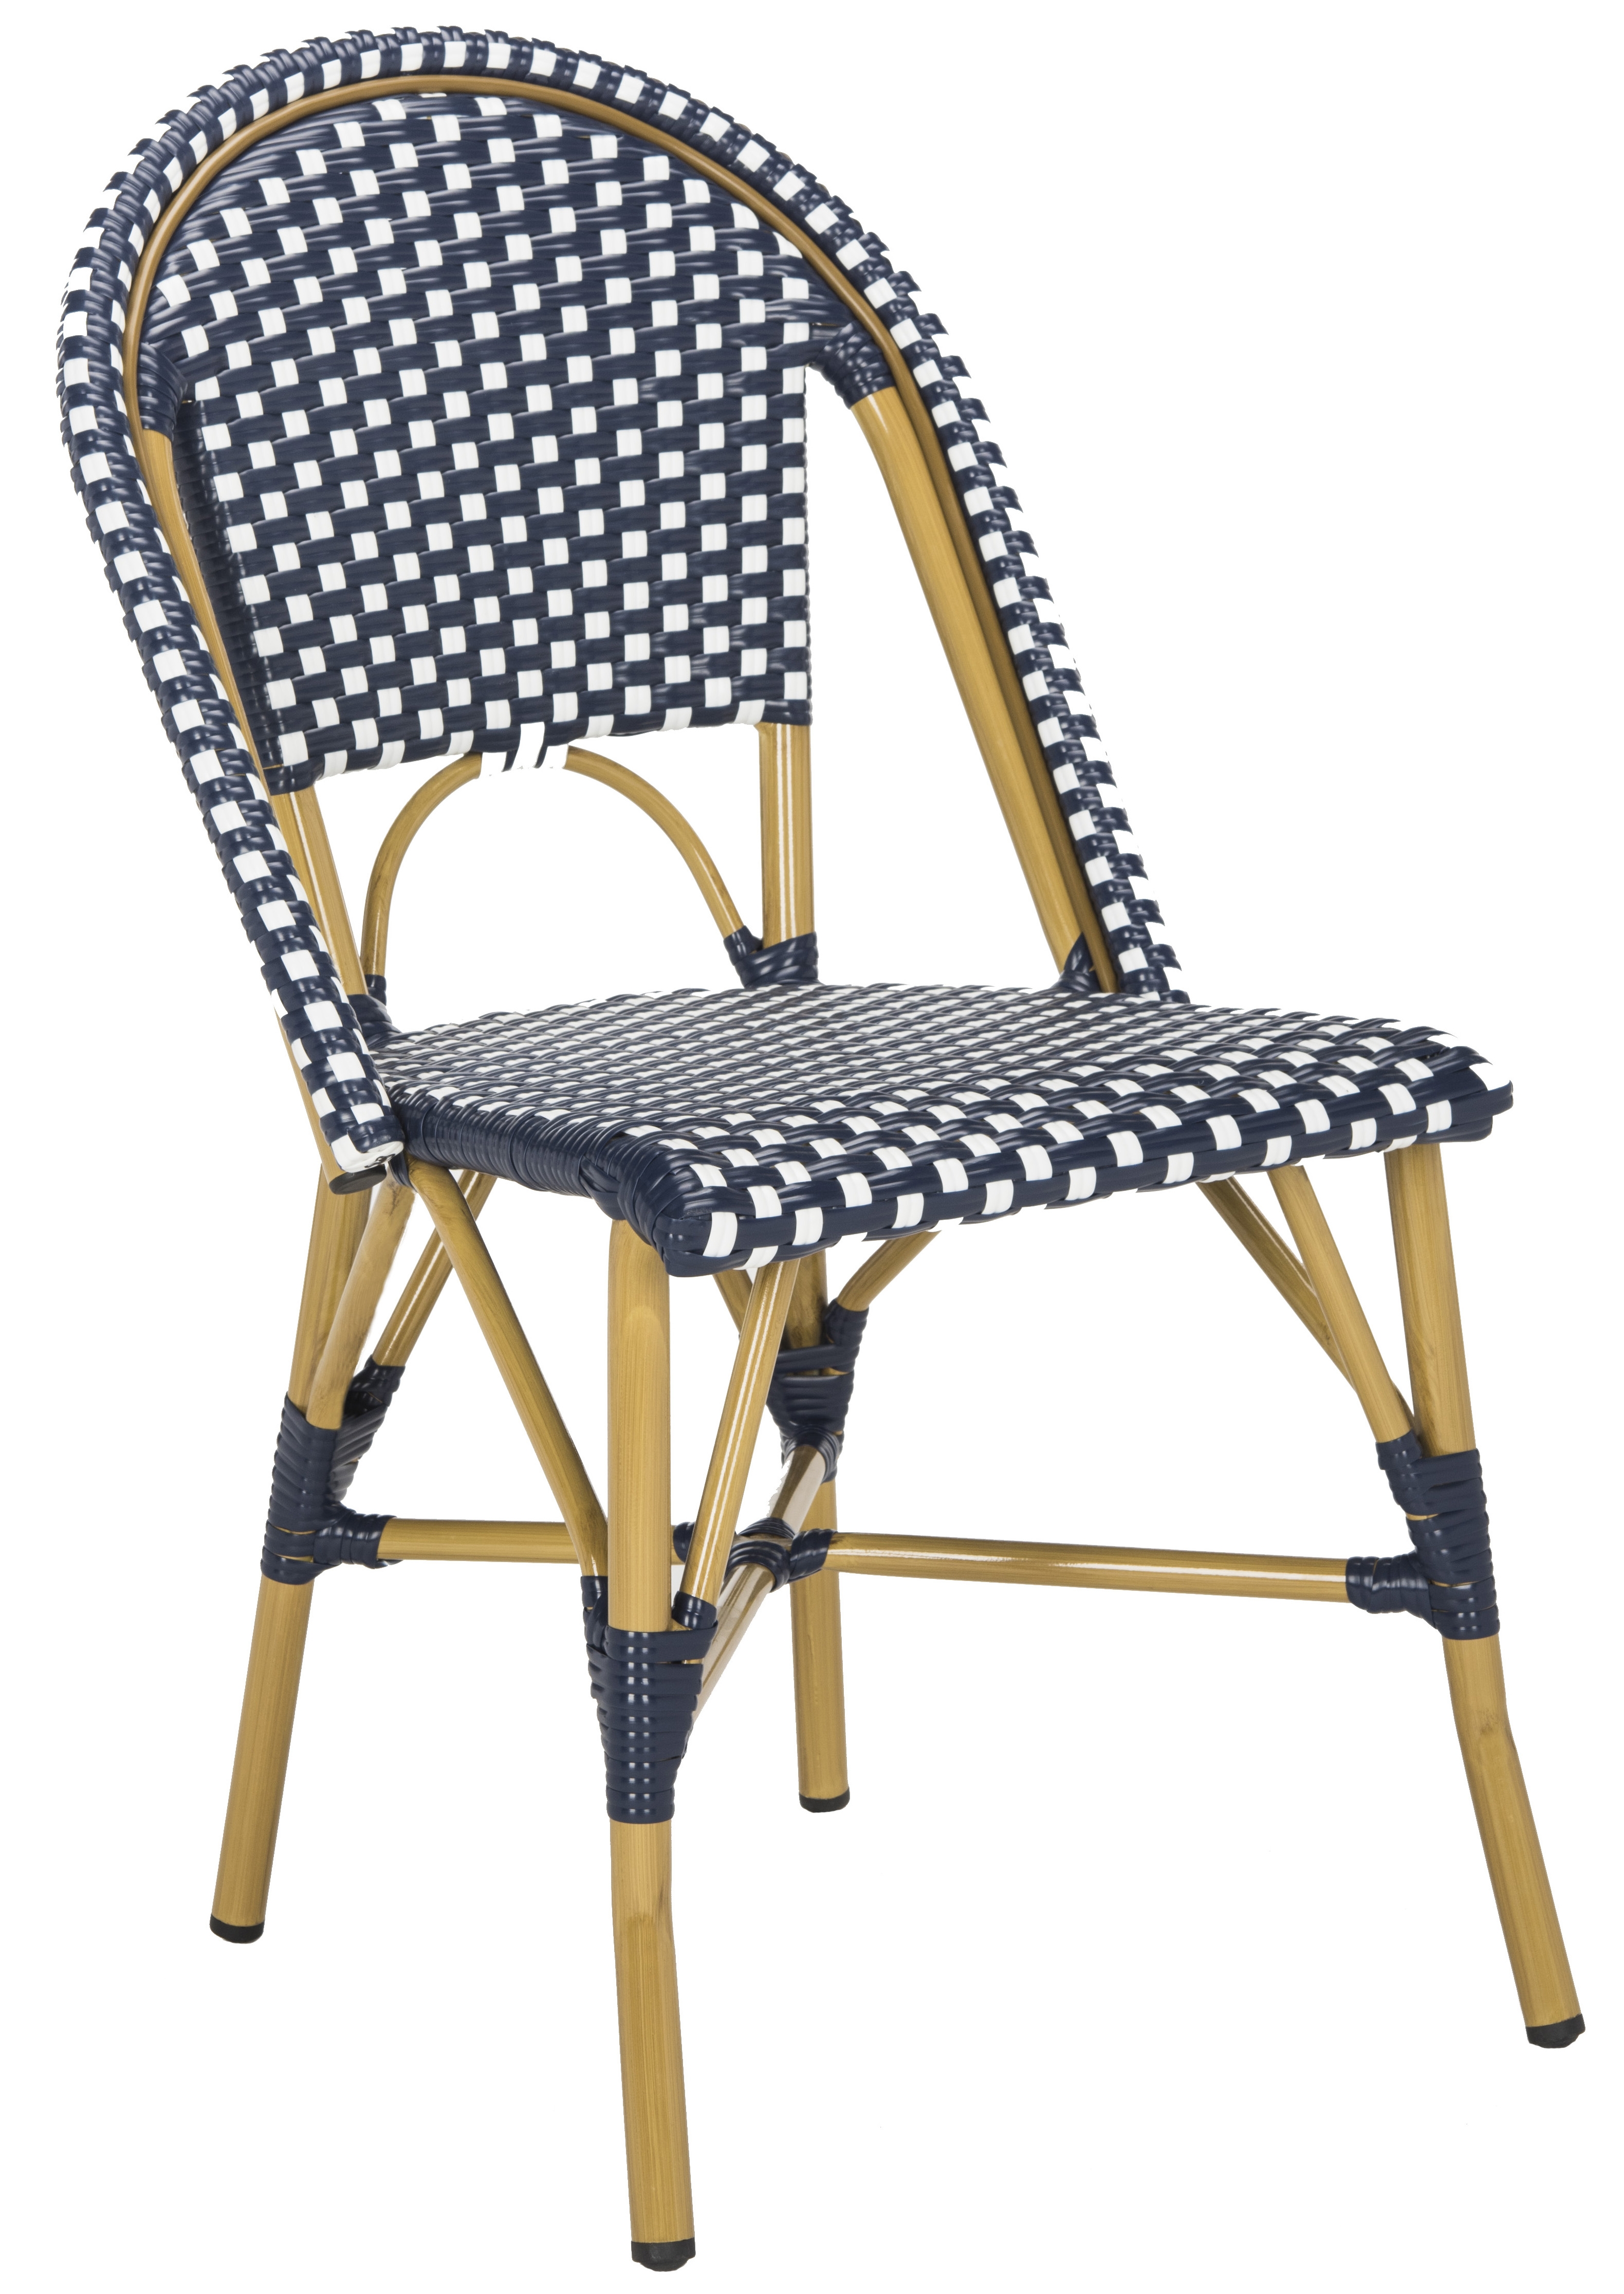 Salcha Indoor-Outdoor French Bistro Stacking Side Chair - Navy/White/Light Brown - Arlo Home - Image 2